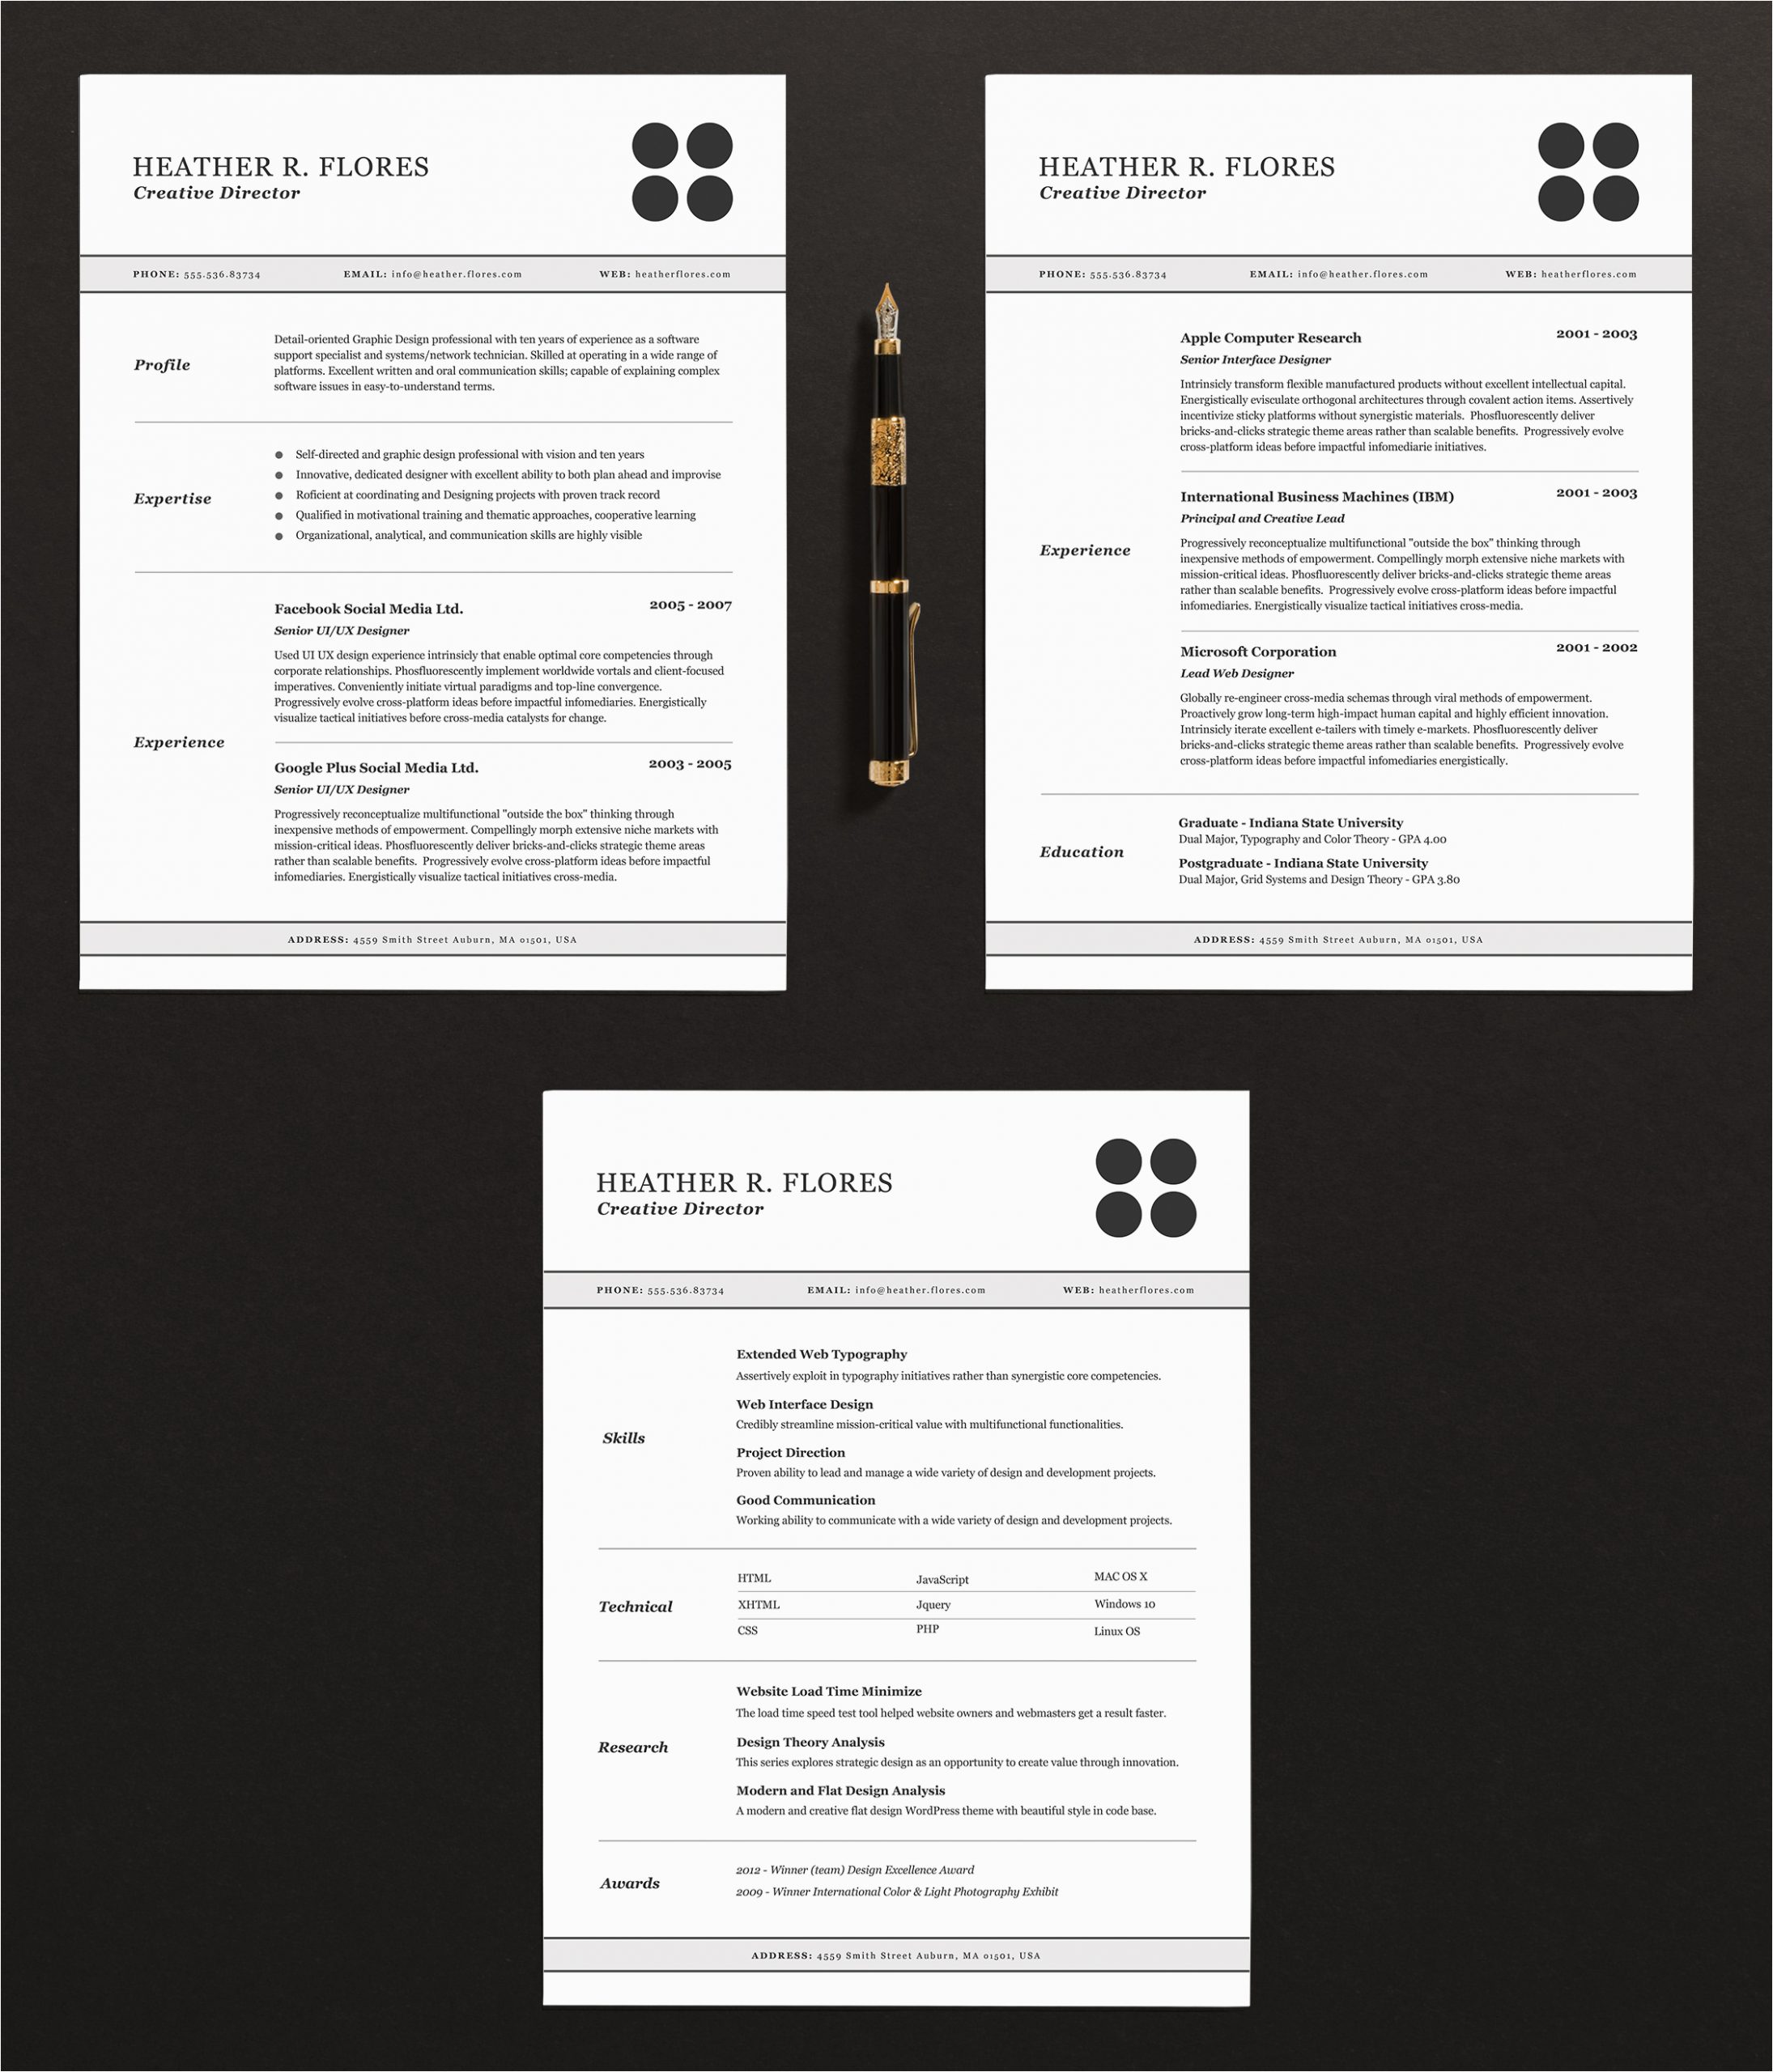 Resume and Cv Templates for Pages 3 Pages Resume Cv Template Full Set Resume Templates On